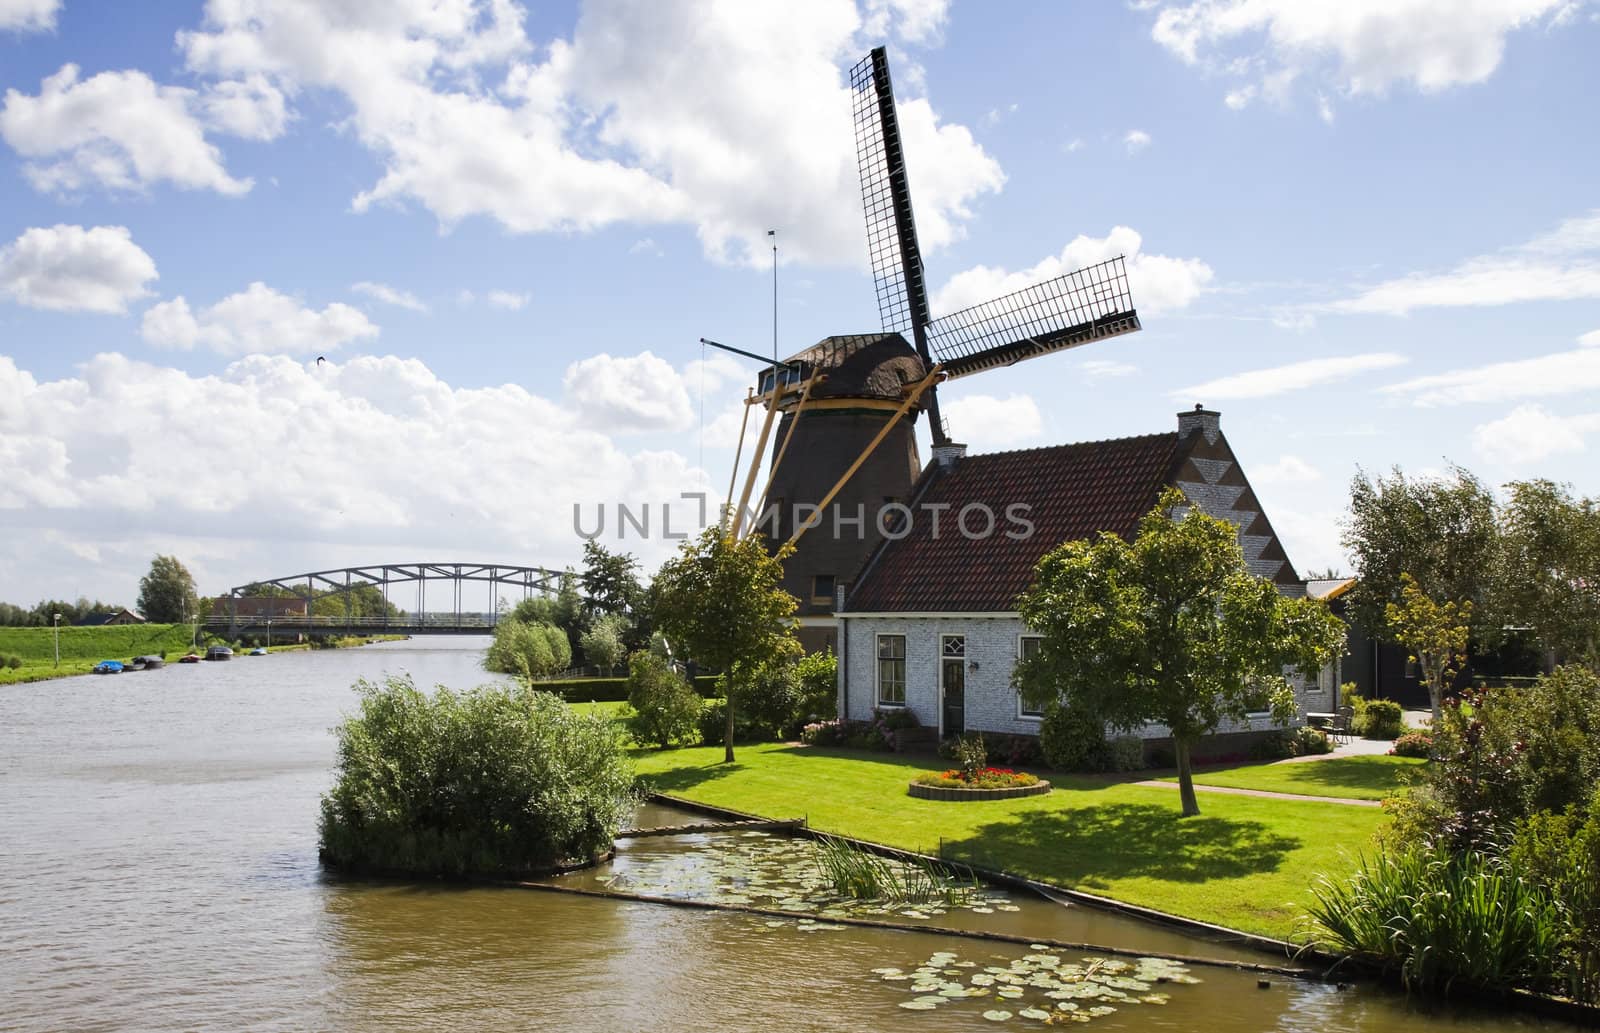 Typical Dutch landscape -  windmill, house and bridge at the waterside